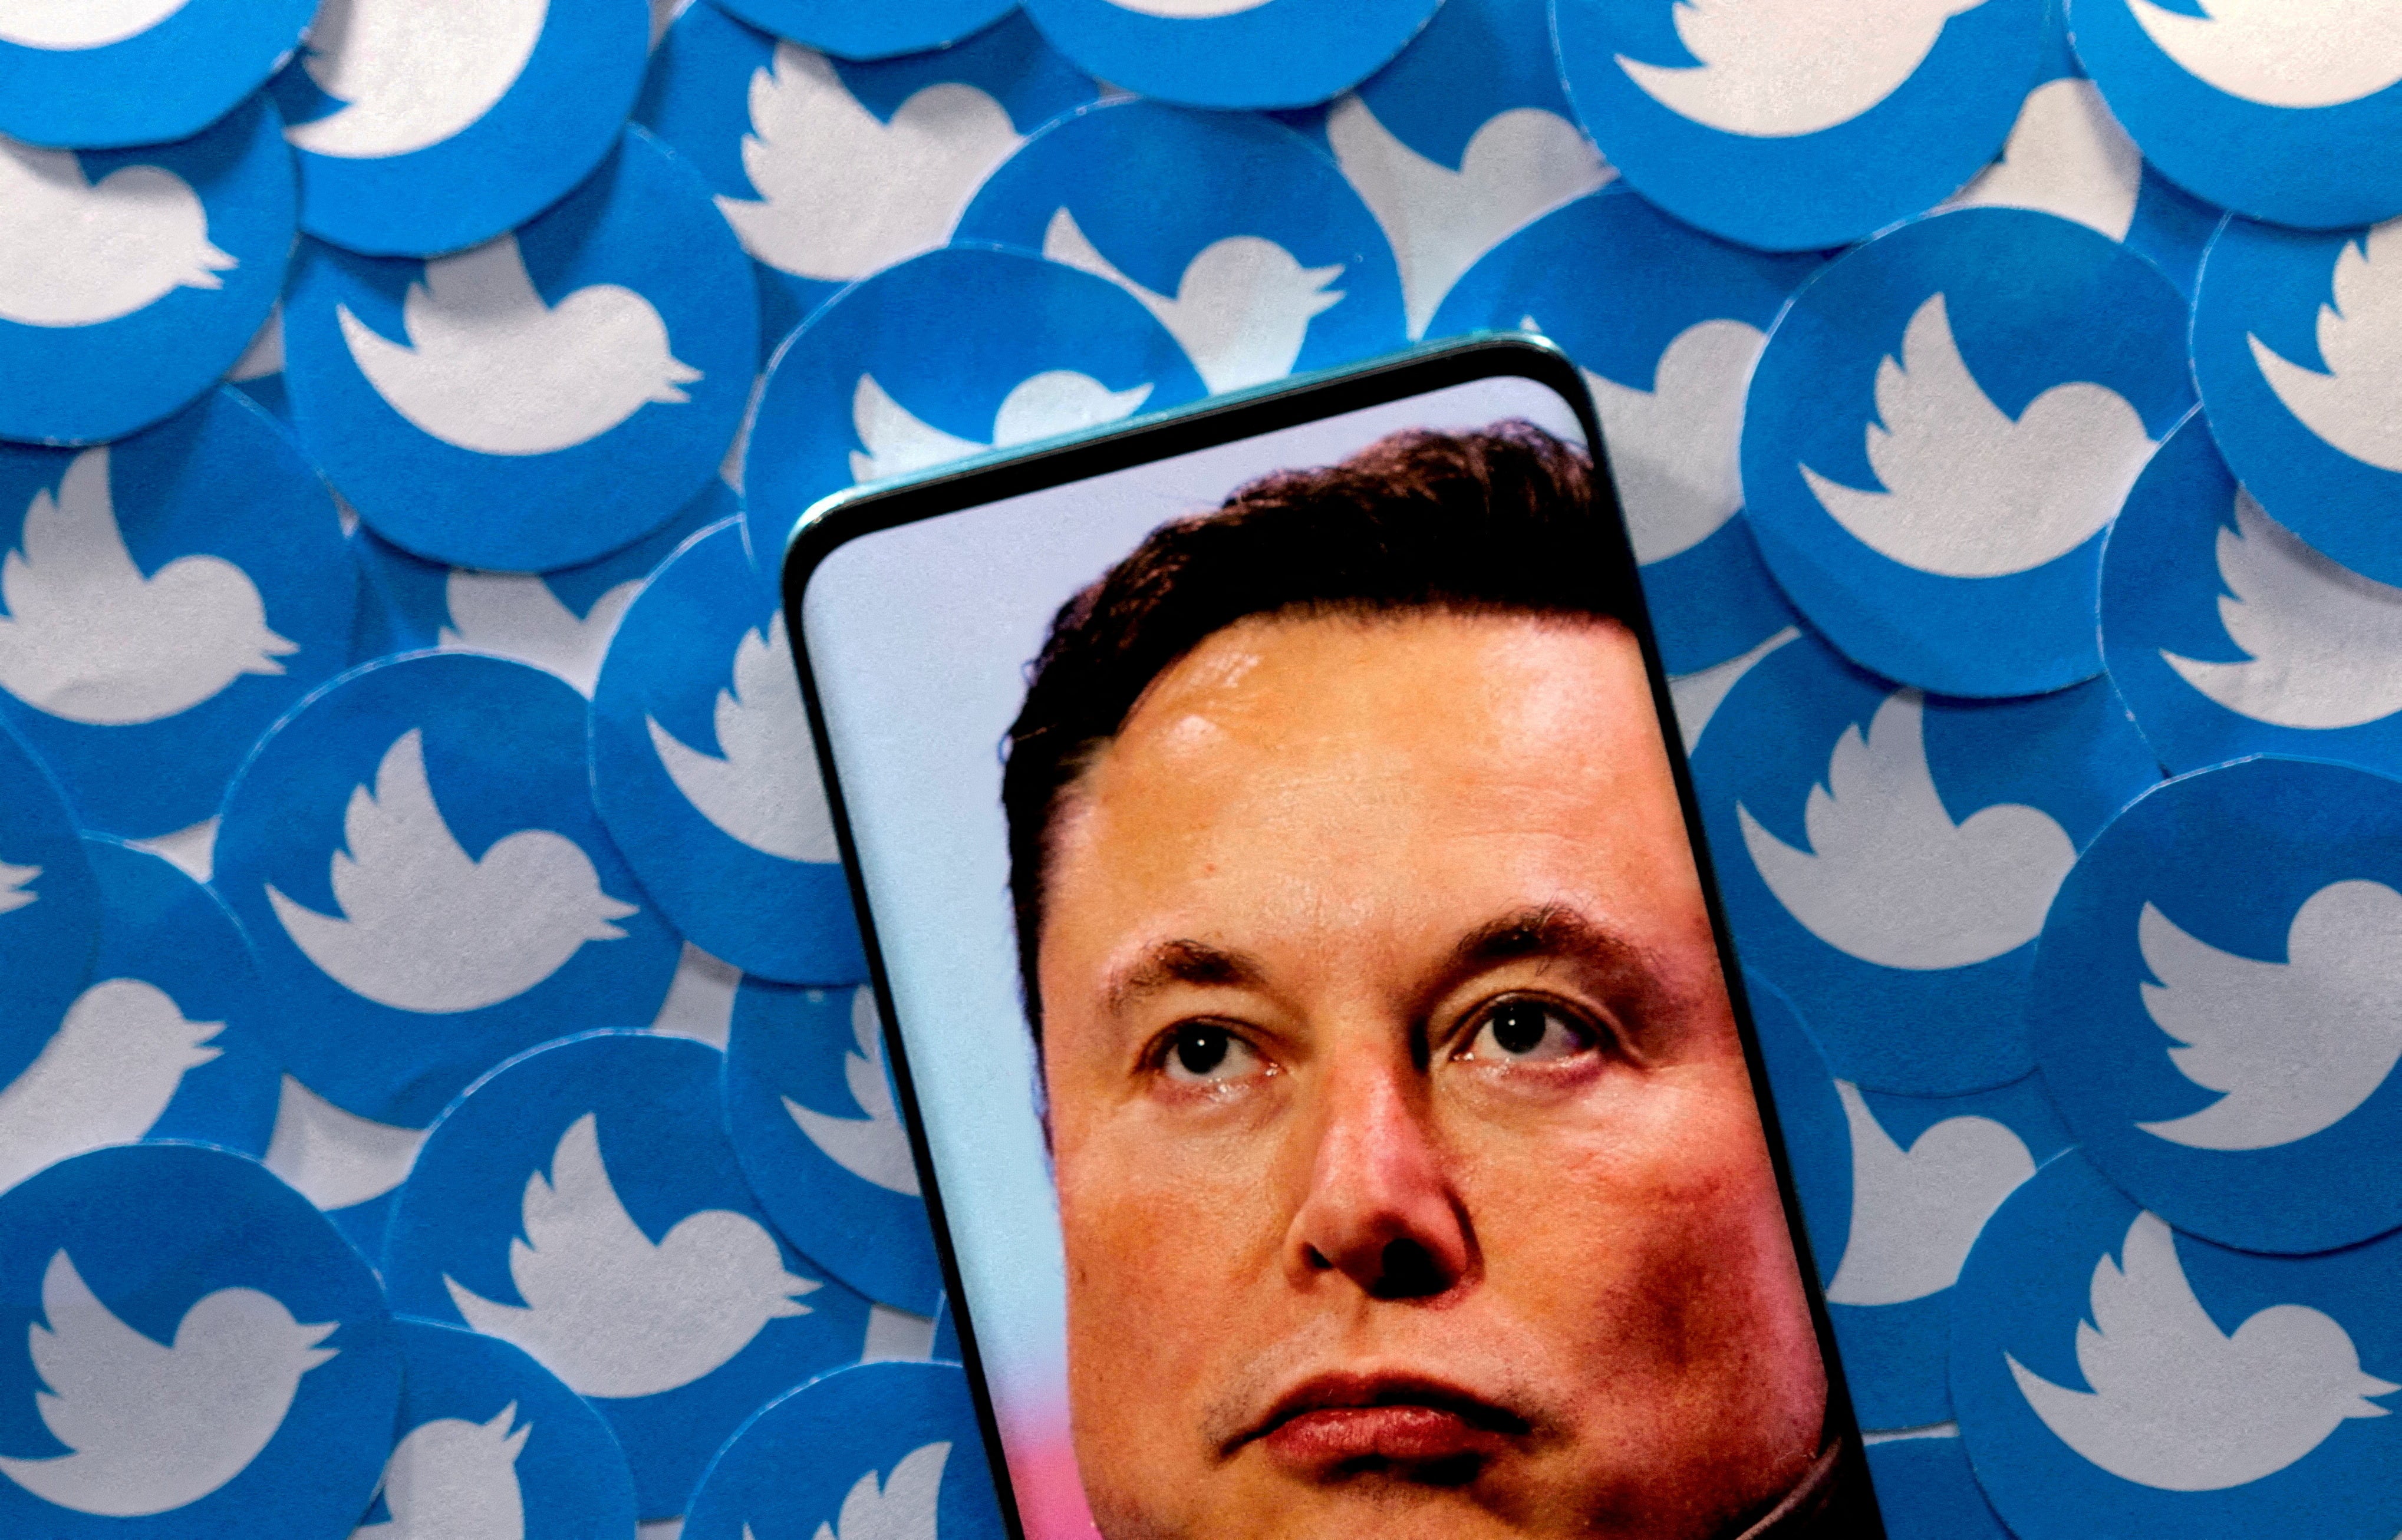 Musk targeted the app with the aim of restoring ‘free speech’